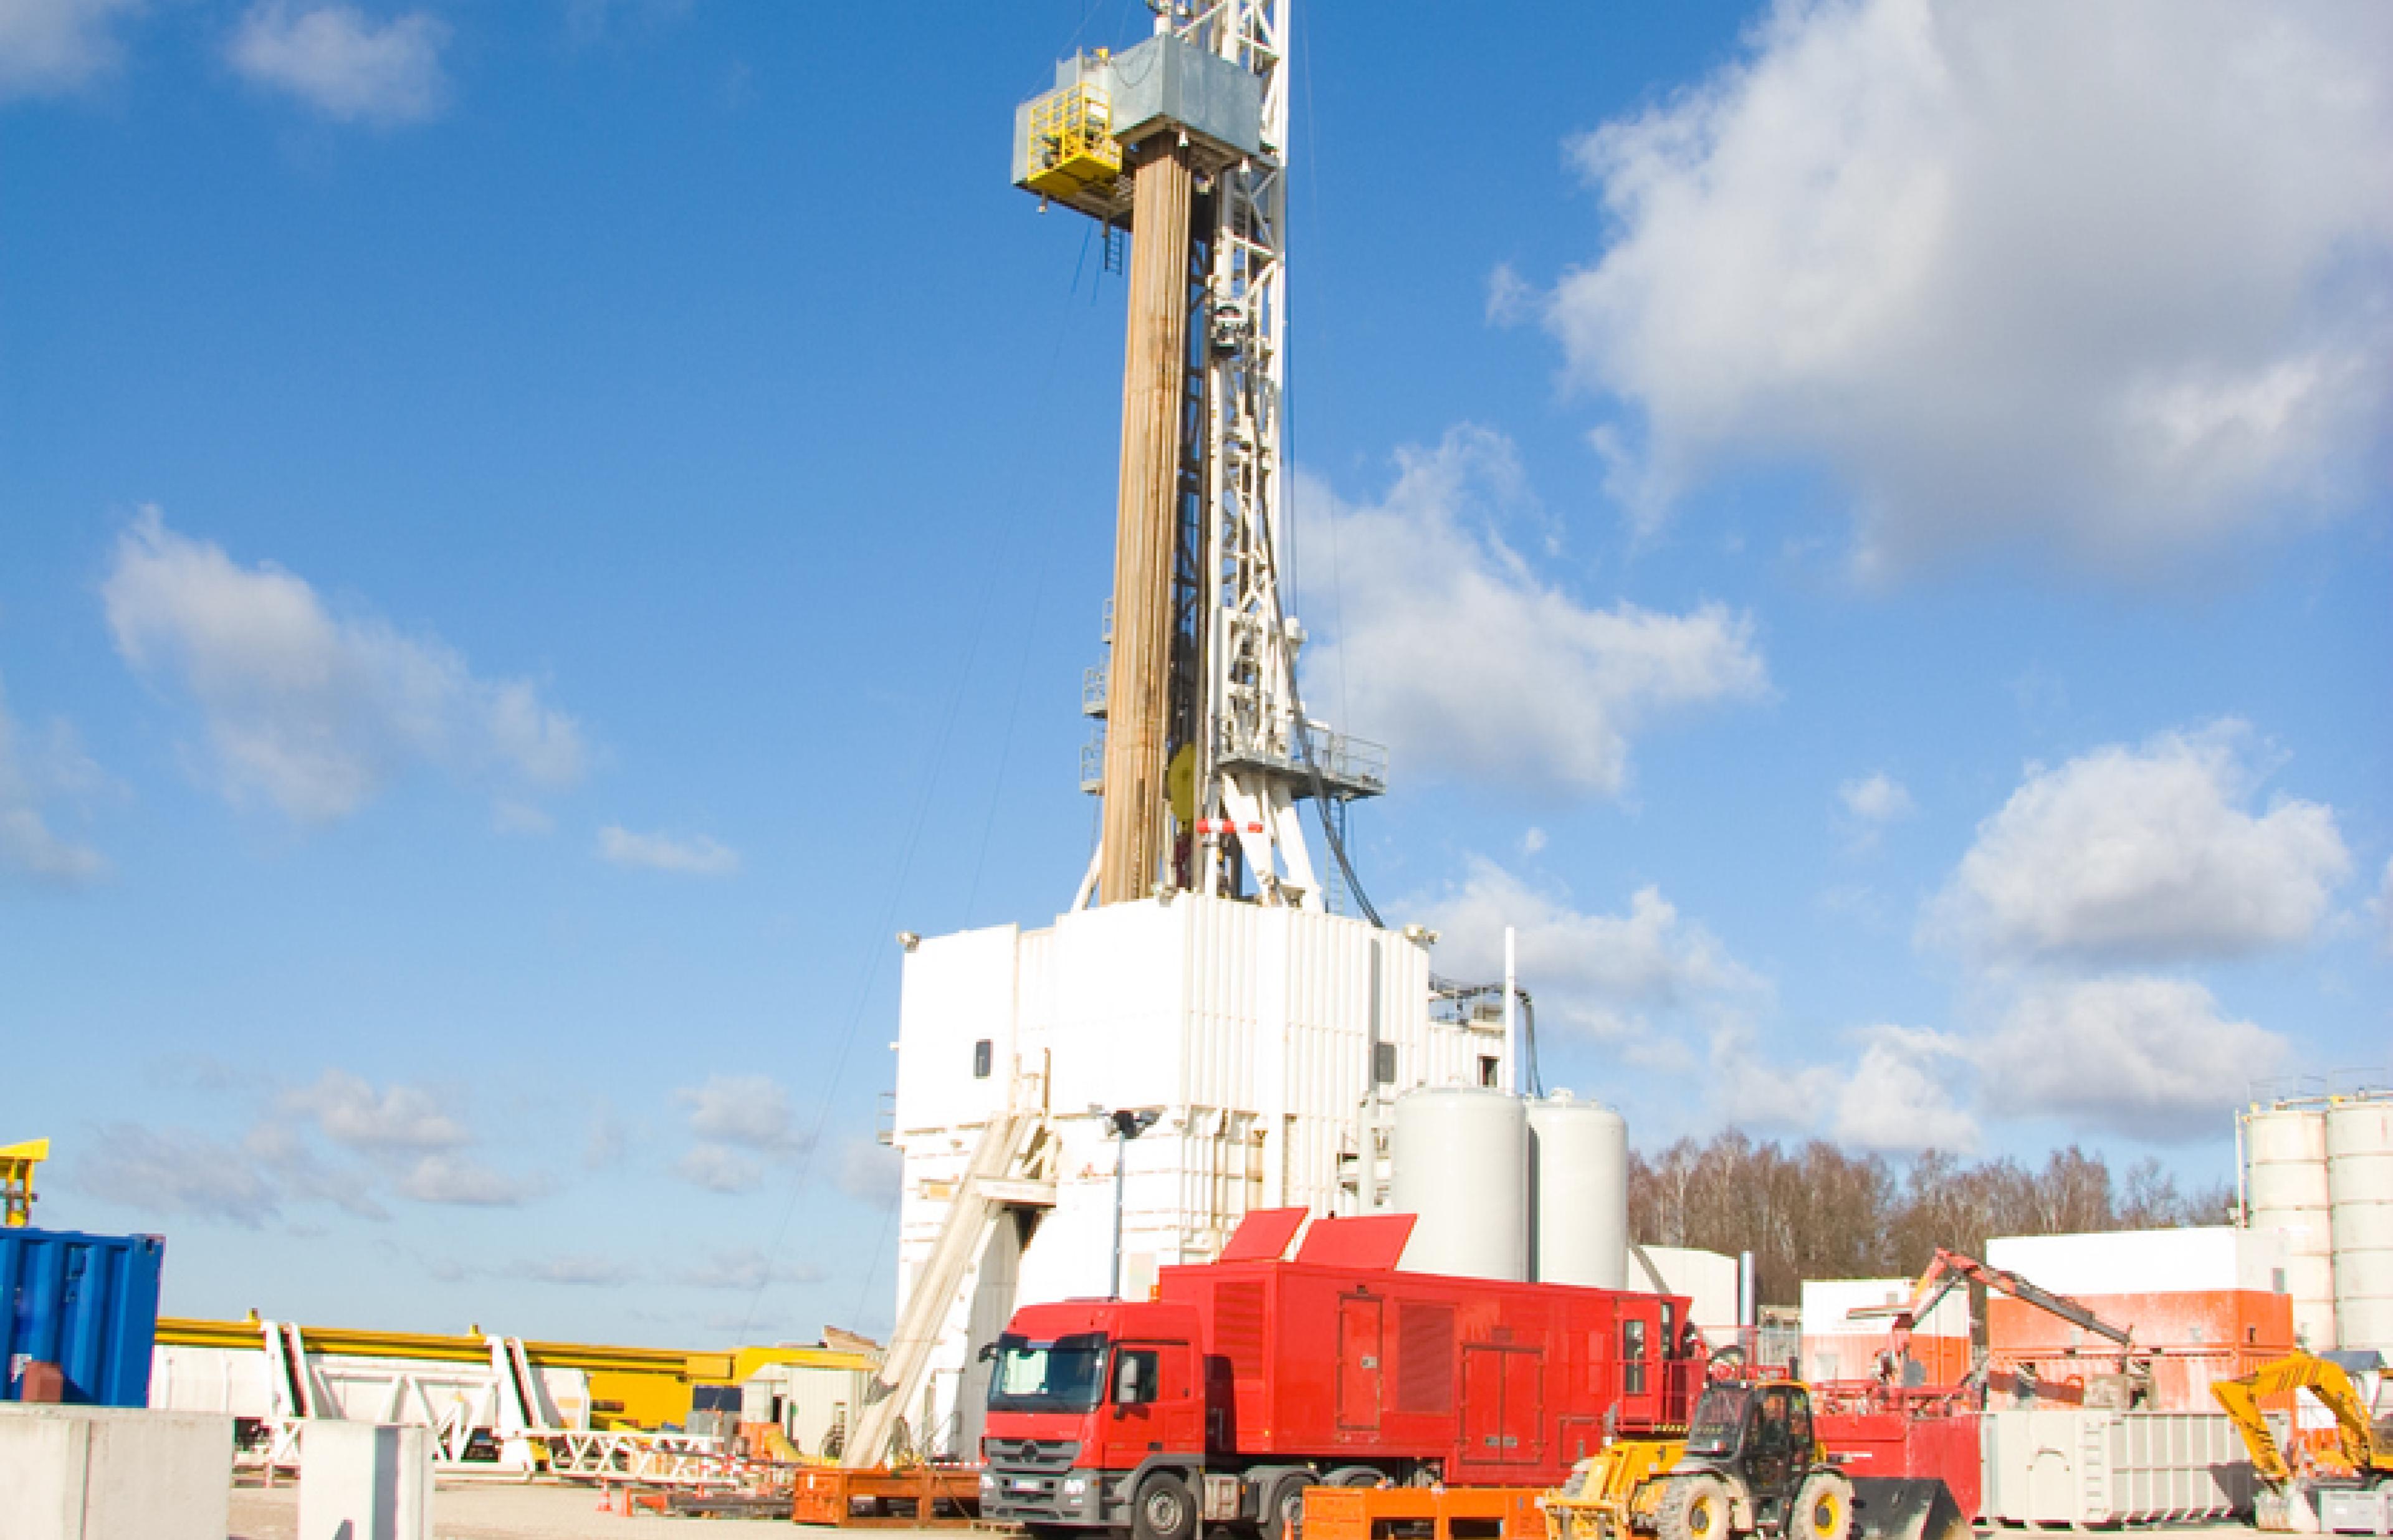 A land based oil rig, drilling rig for oil or gas, possibly shale gas